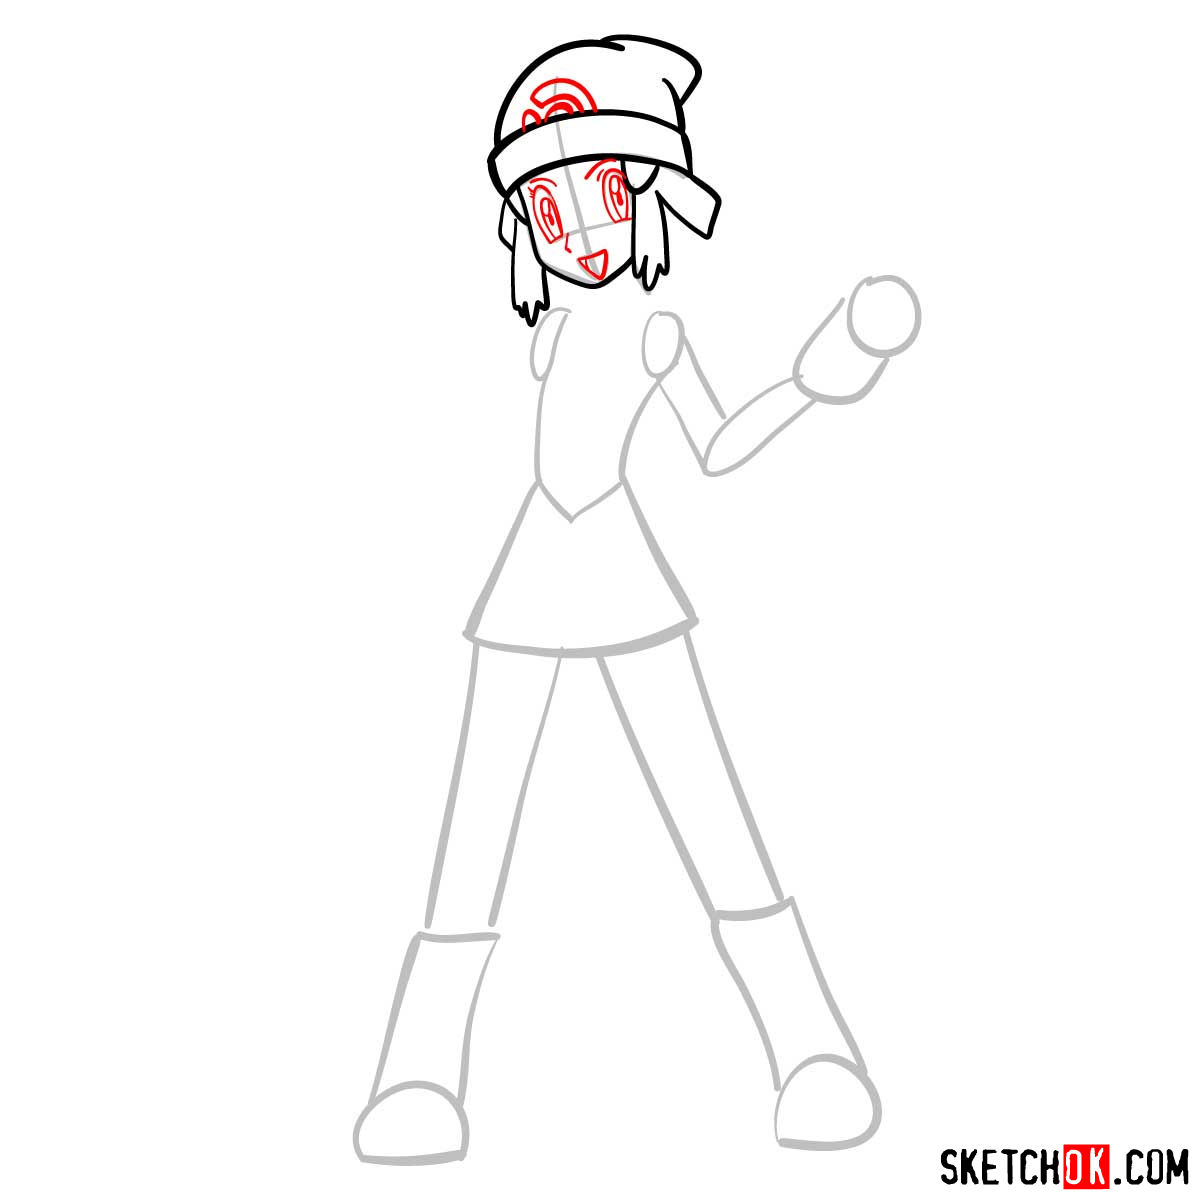 How to draw Dawn from Pokemon anime - step 06